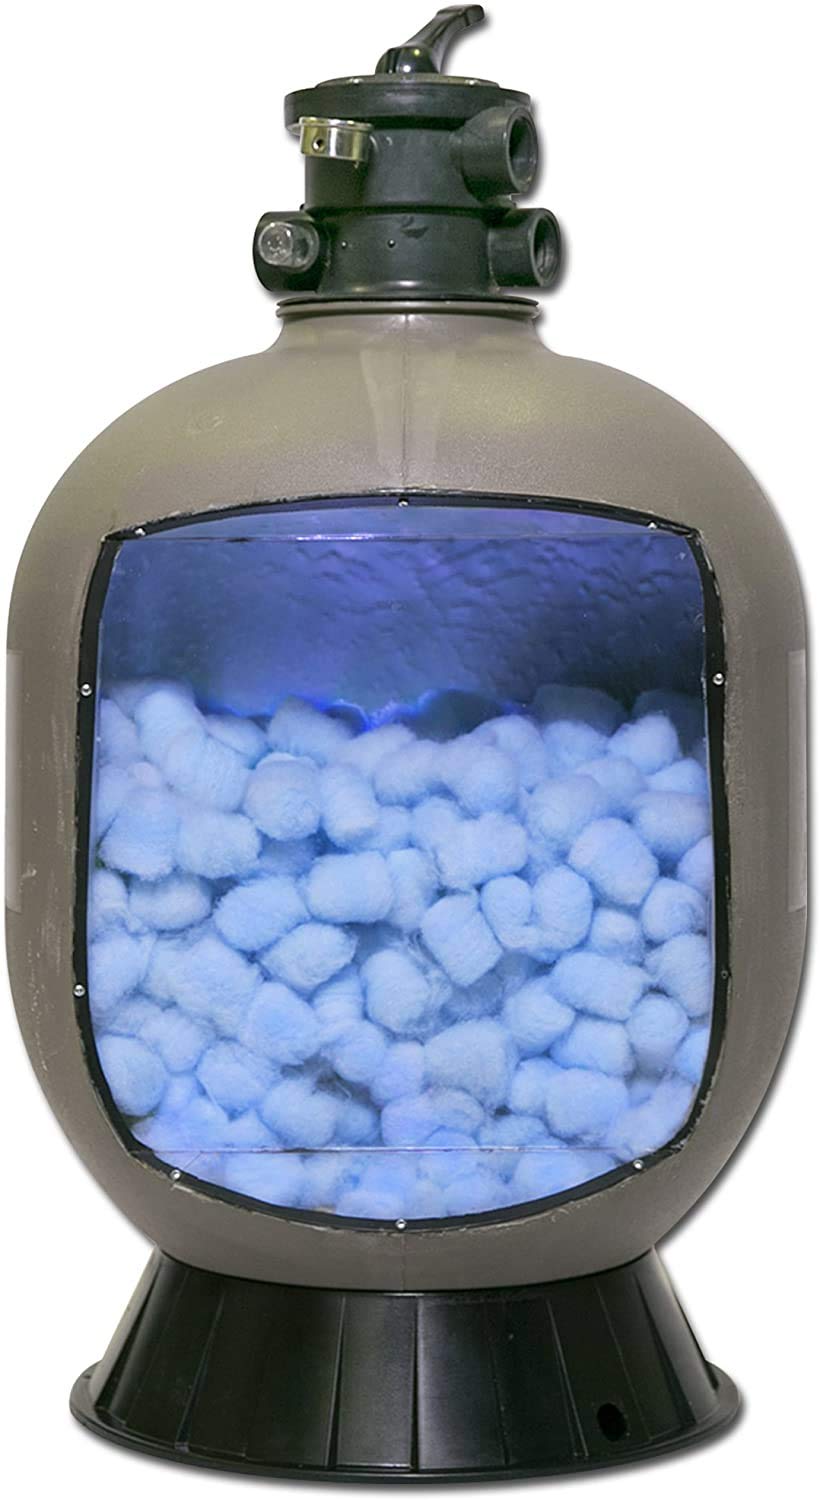 FilterBalls Blu™ (5-pack) -   For sand housings rated at 425 to 500 Lbs